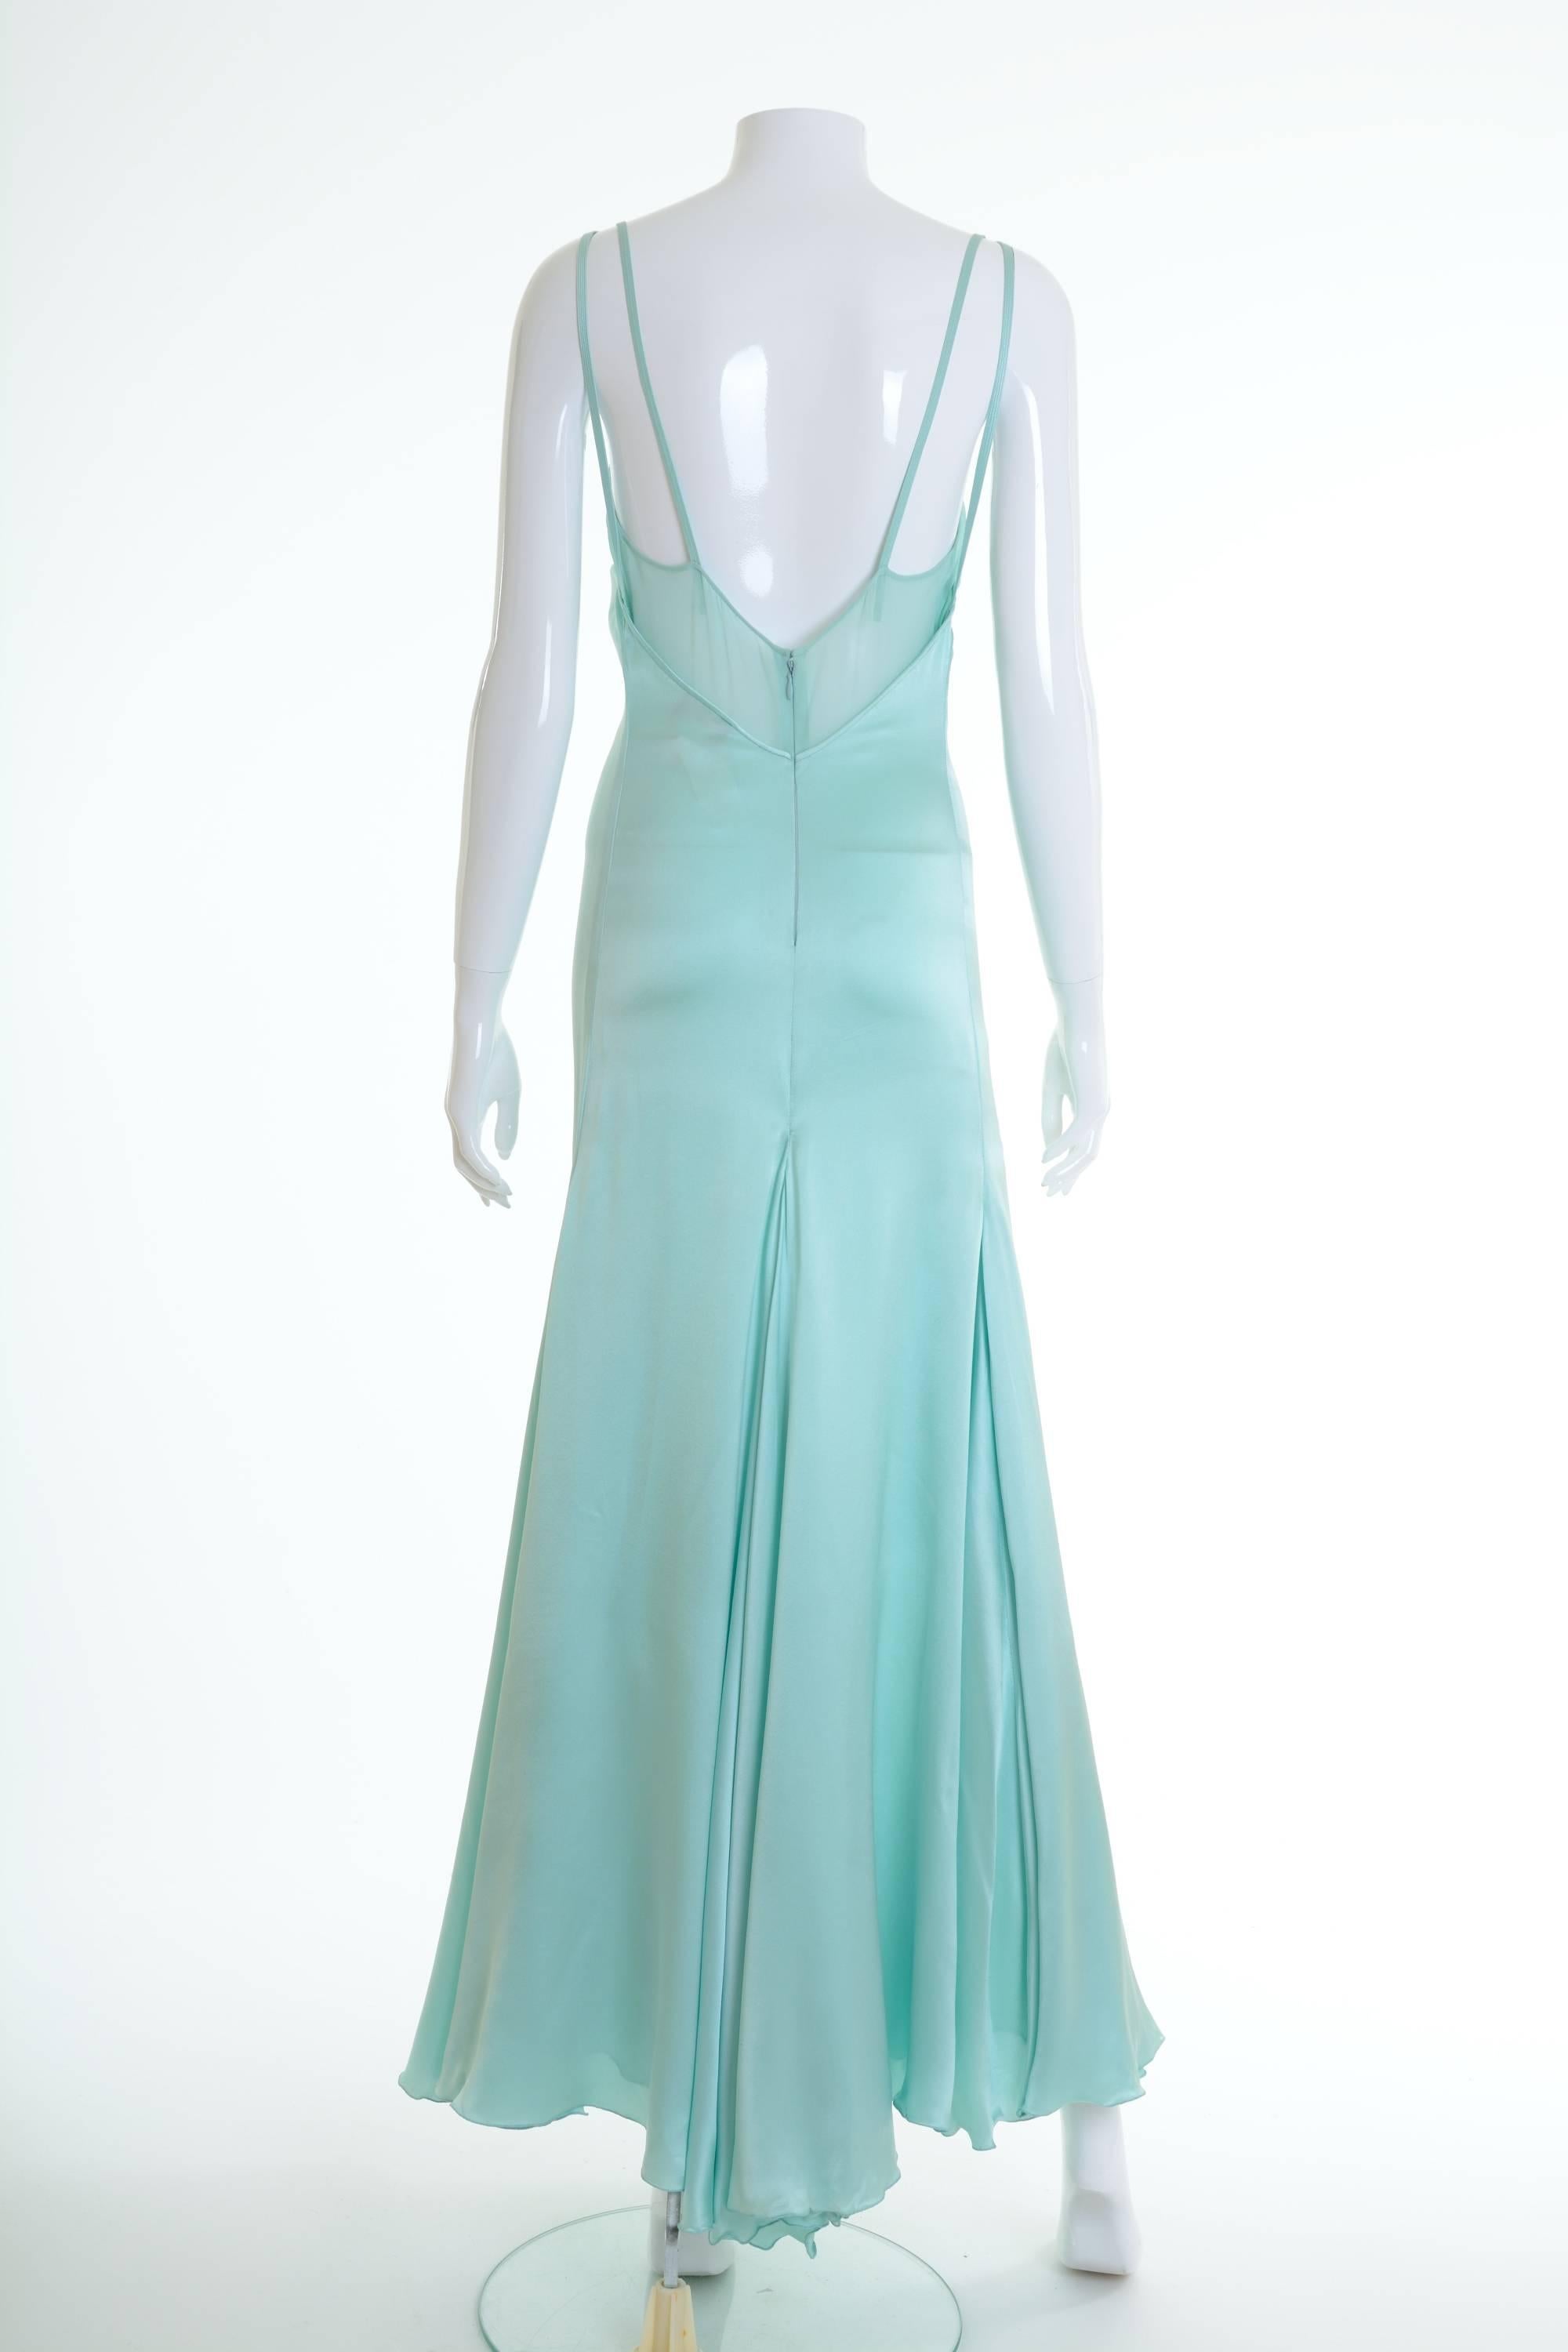 This gorgeous Gianni Versace long dress is in mint green silk satin and chiffon fabric with double shoulder spaghetti strap and double fabric on the bodice. It has back zip closure and Versace metail details. 

Good vintage condition

Label: Gianni